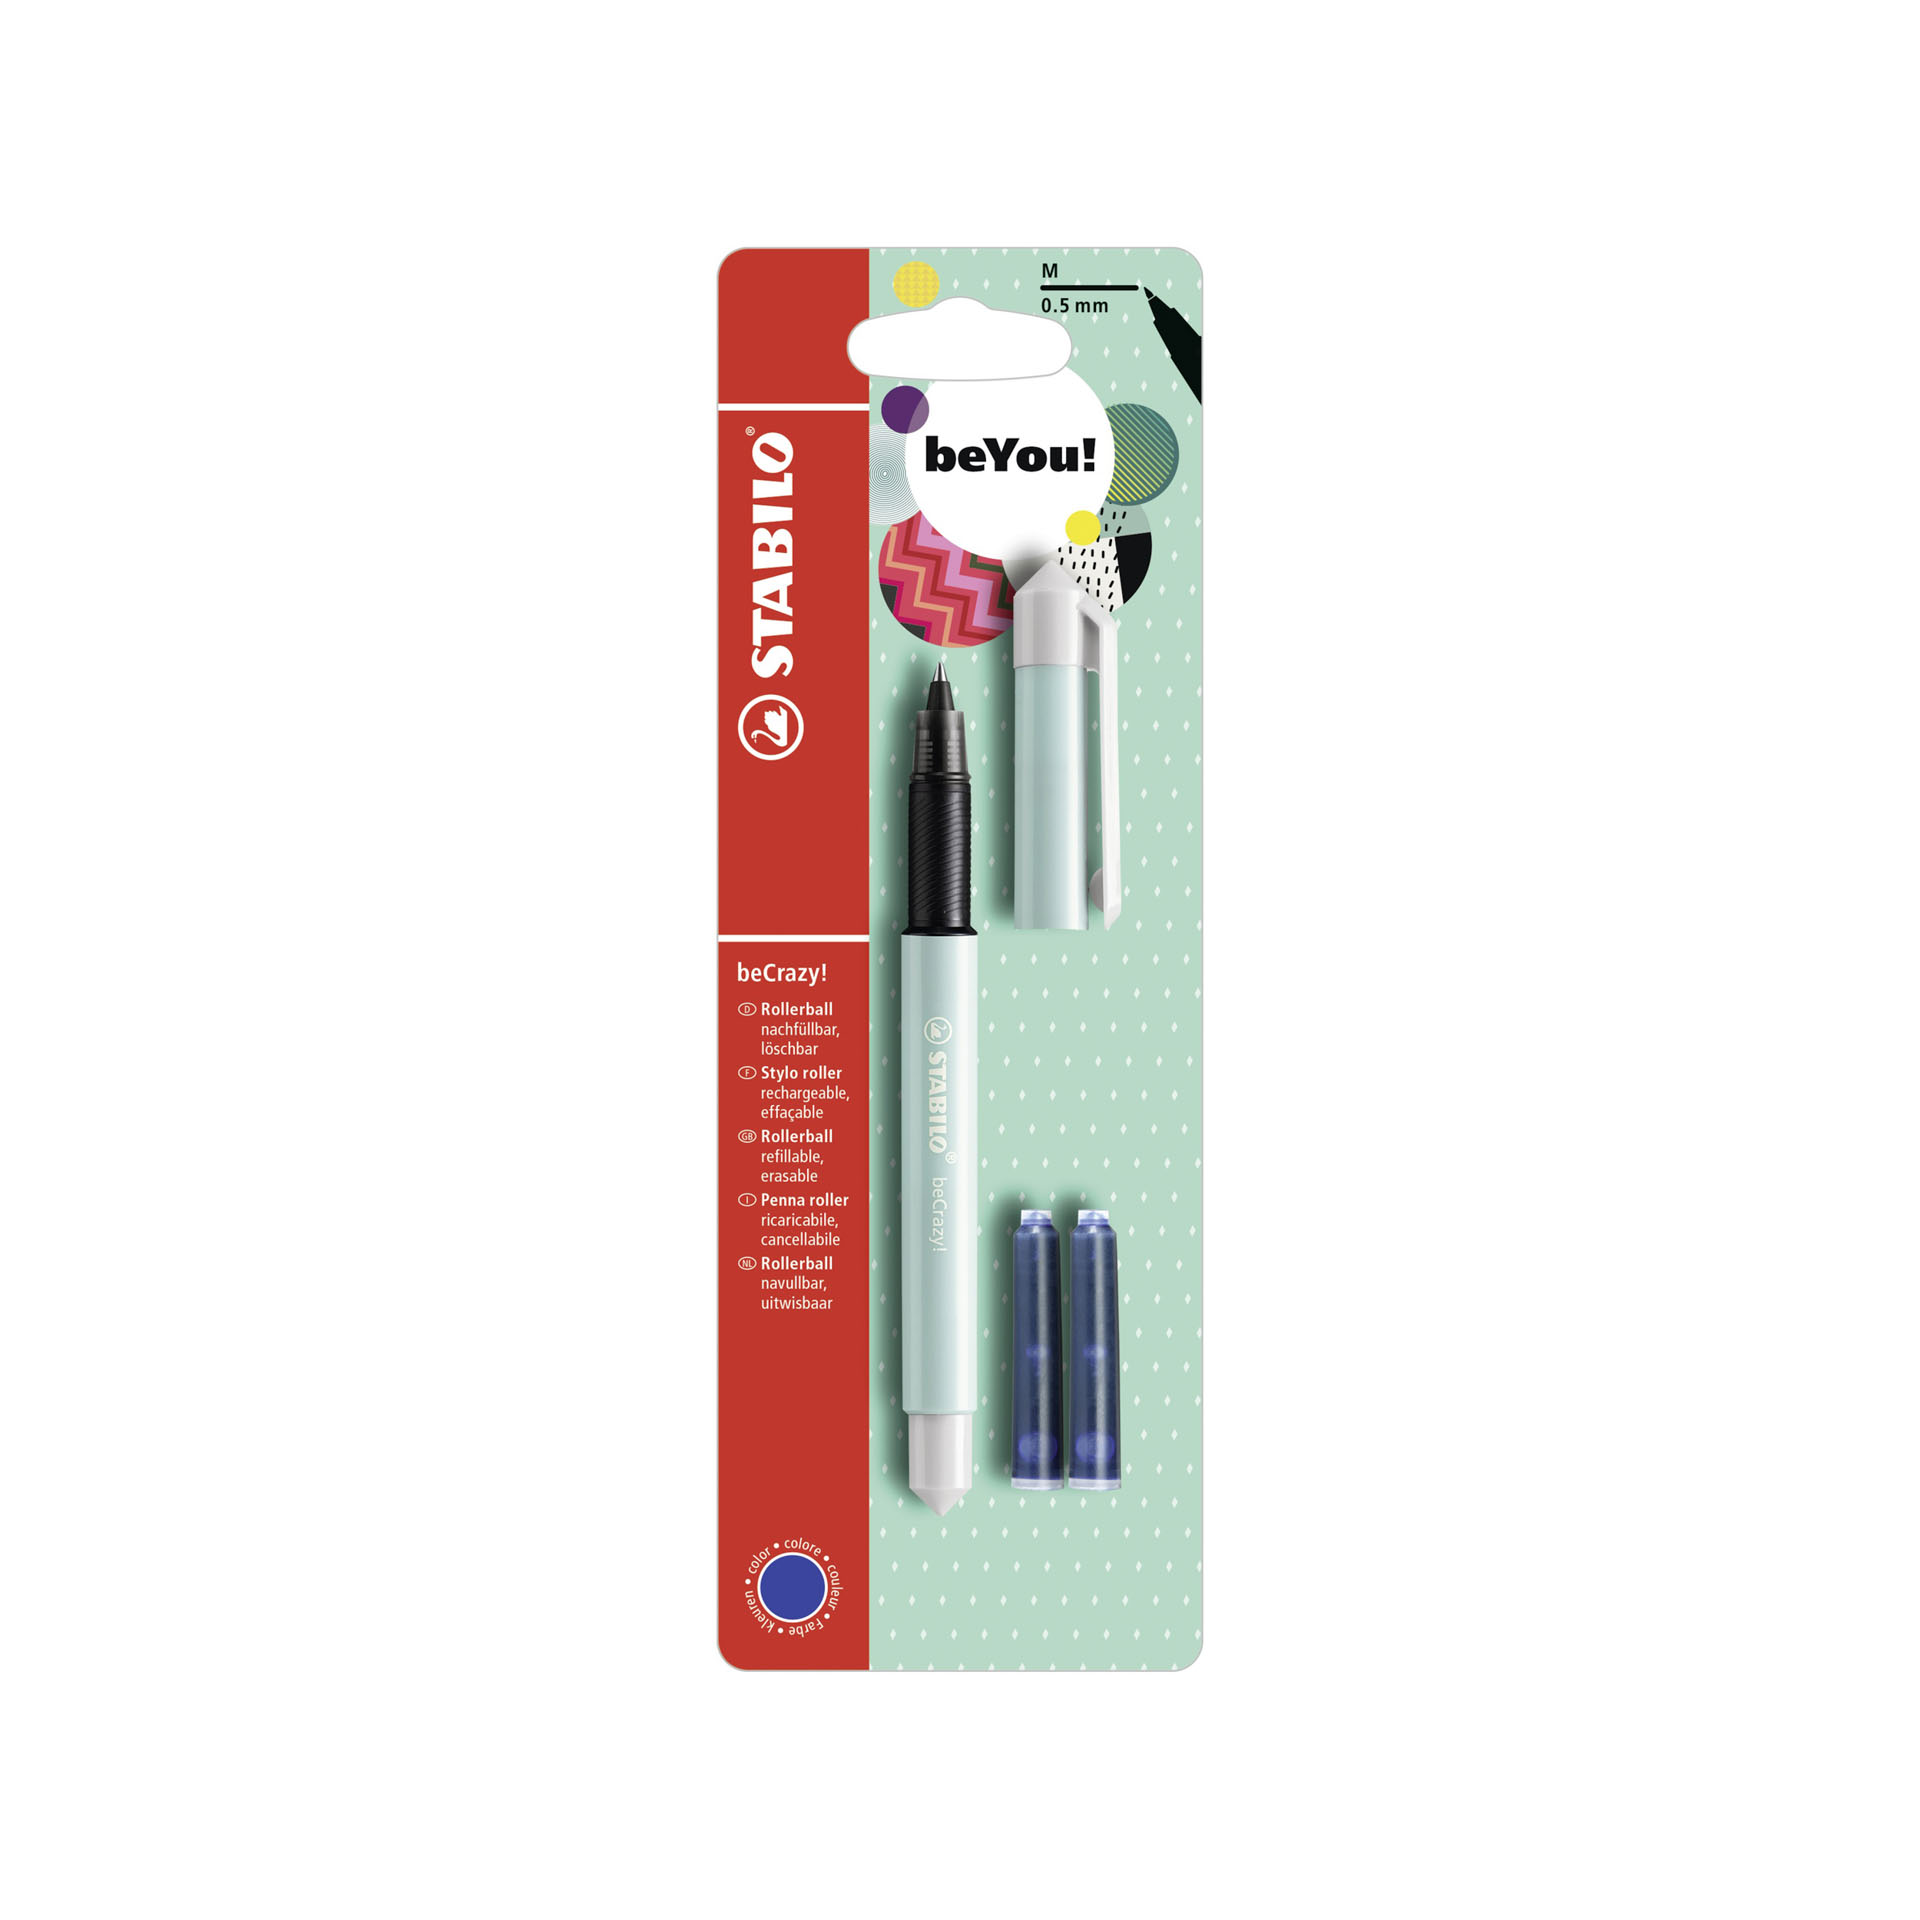 Penna Roller - STABILO beCrazy! Pastel in Turchese - 3 Cartucce Blu incluse, , large